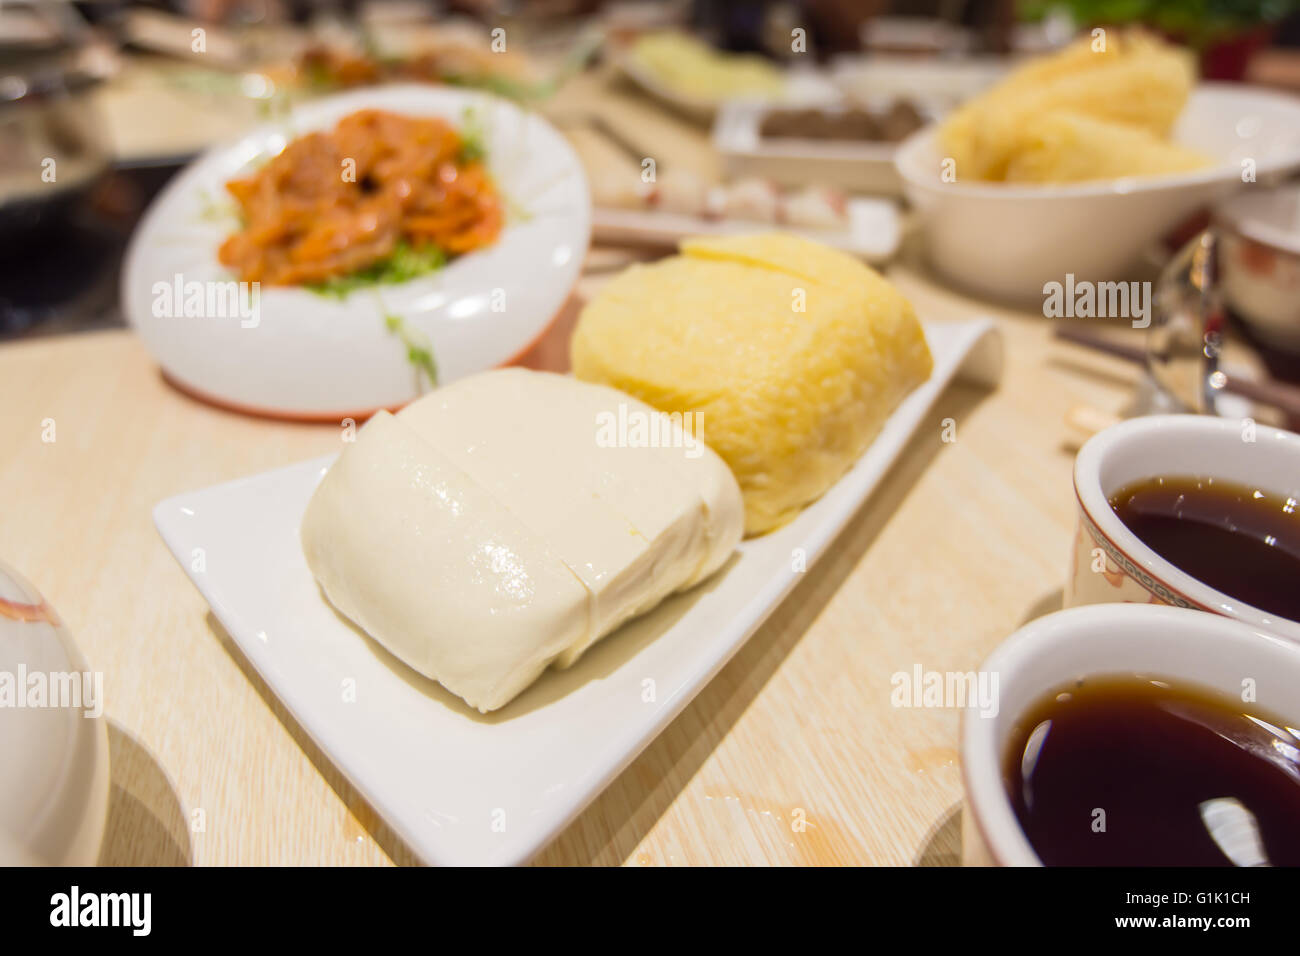 Sliced tofu on plate in Hong Kong Stock Photo